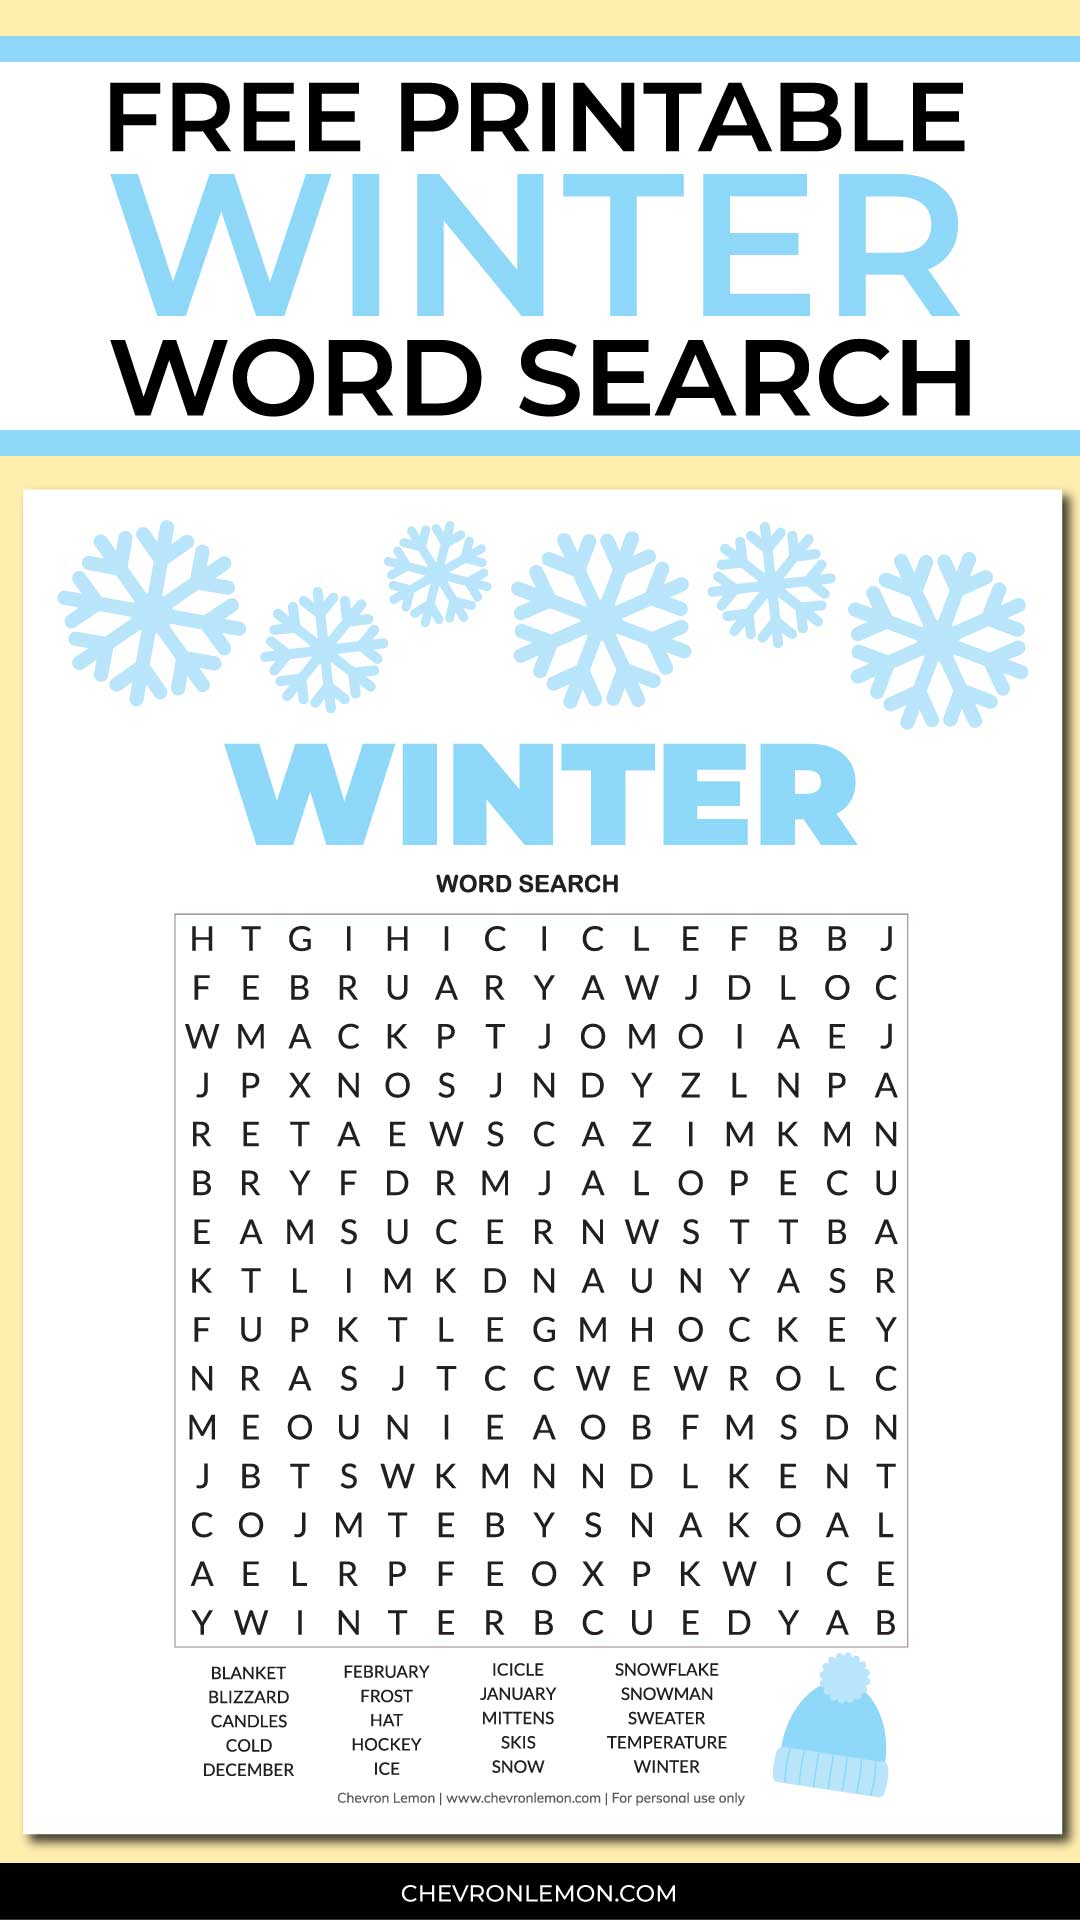 Printable winter word search